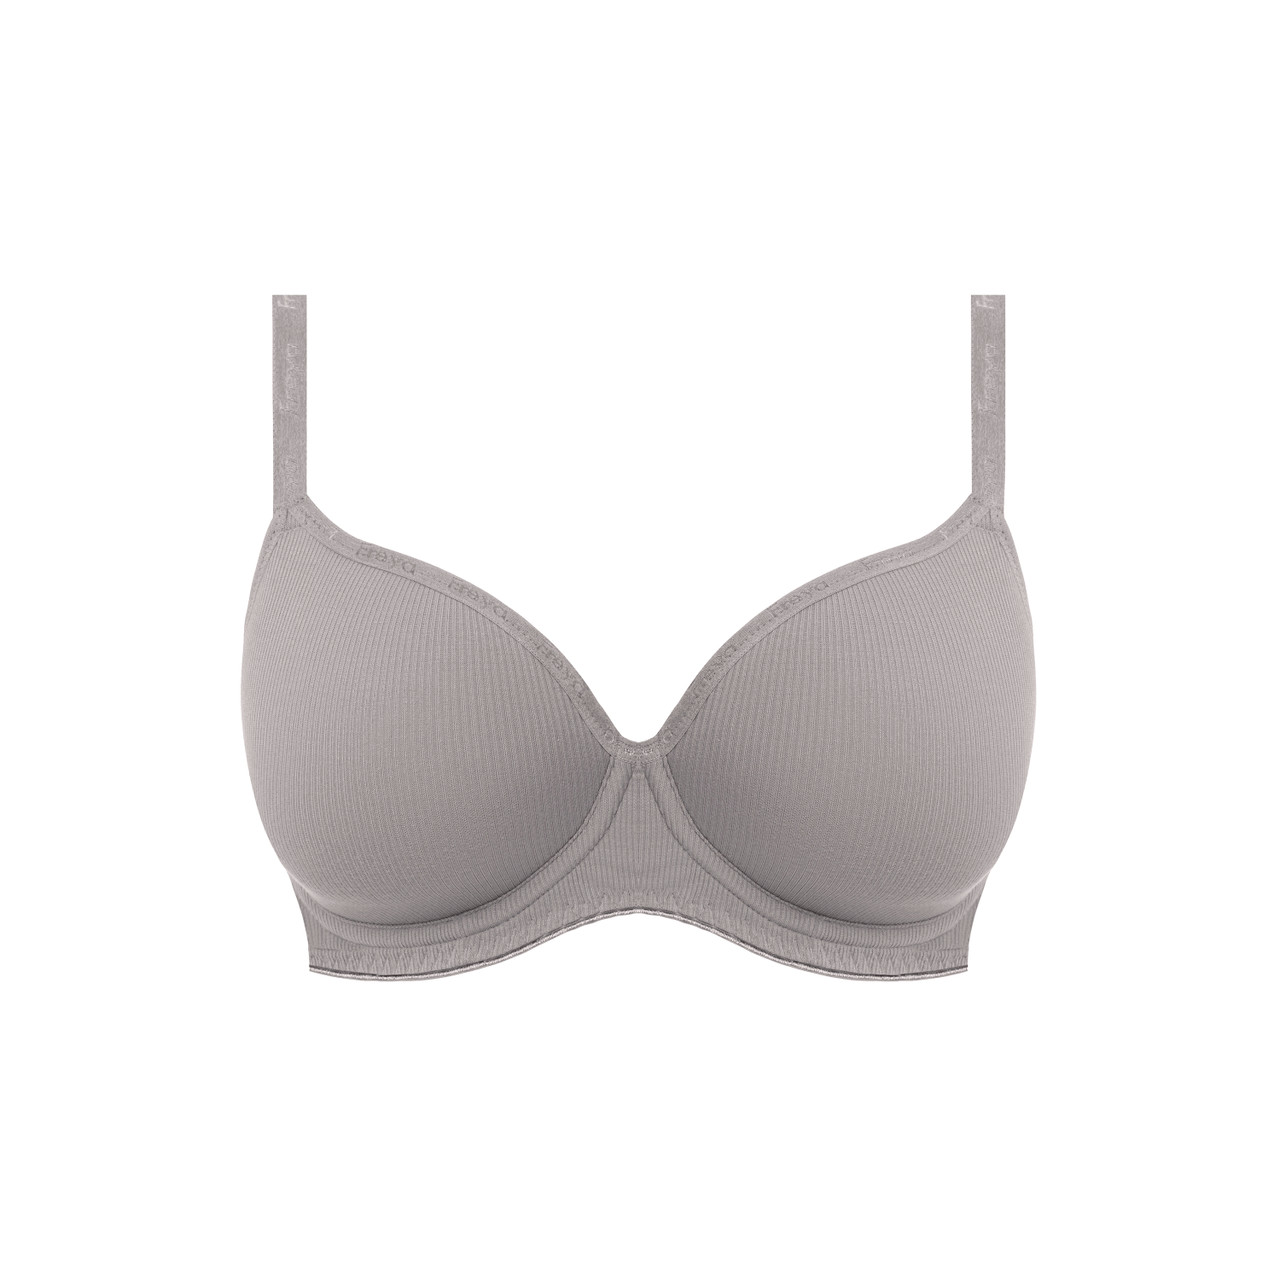 Freya Chill Short in Cool Grey FINAL SALE (40% Off) - Busted Bra Shop